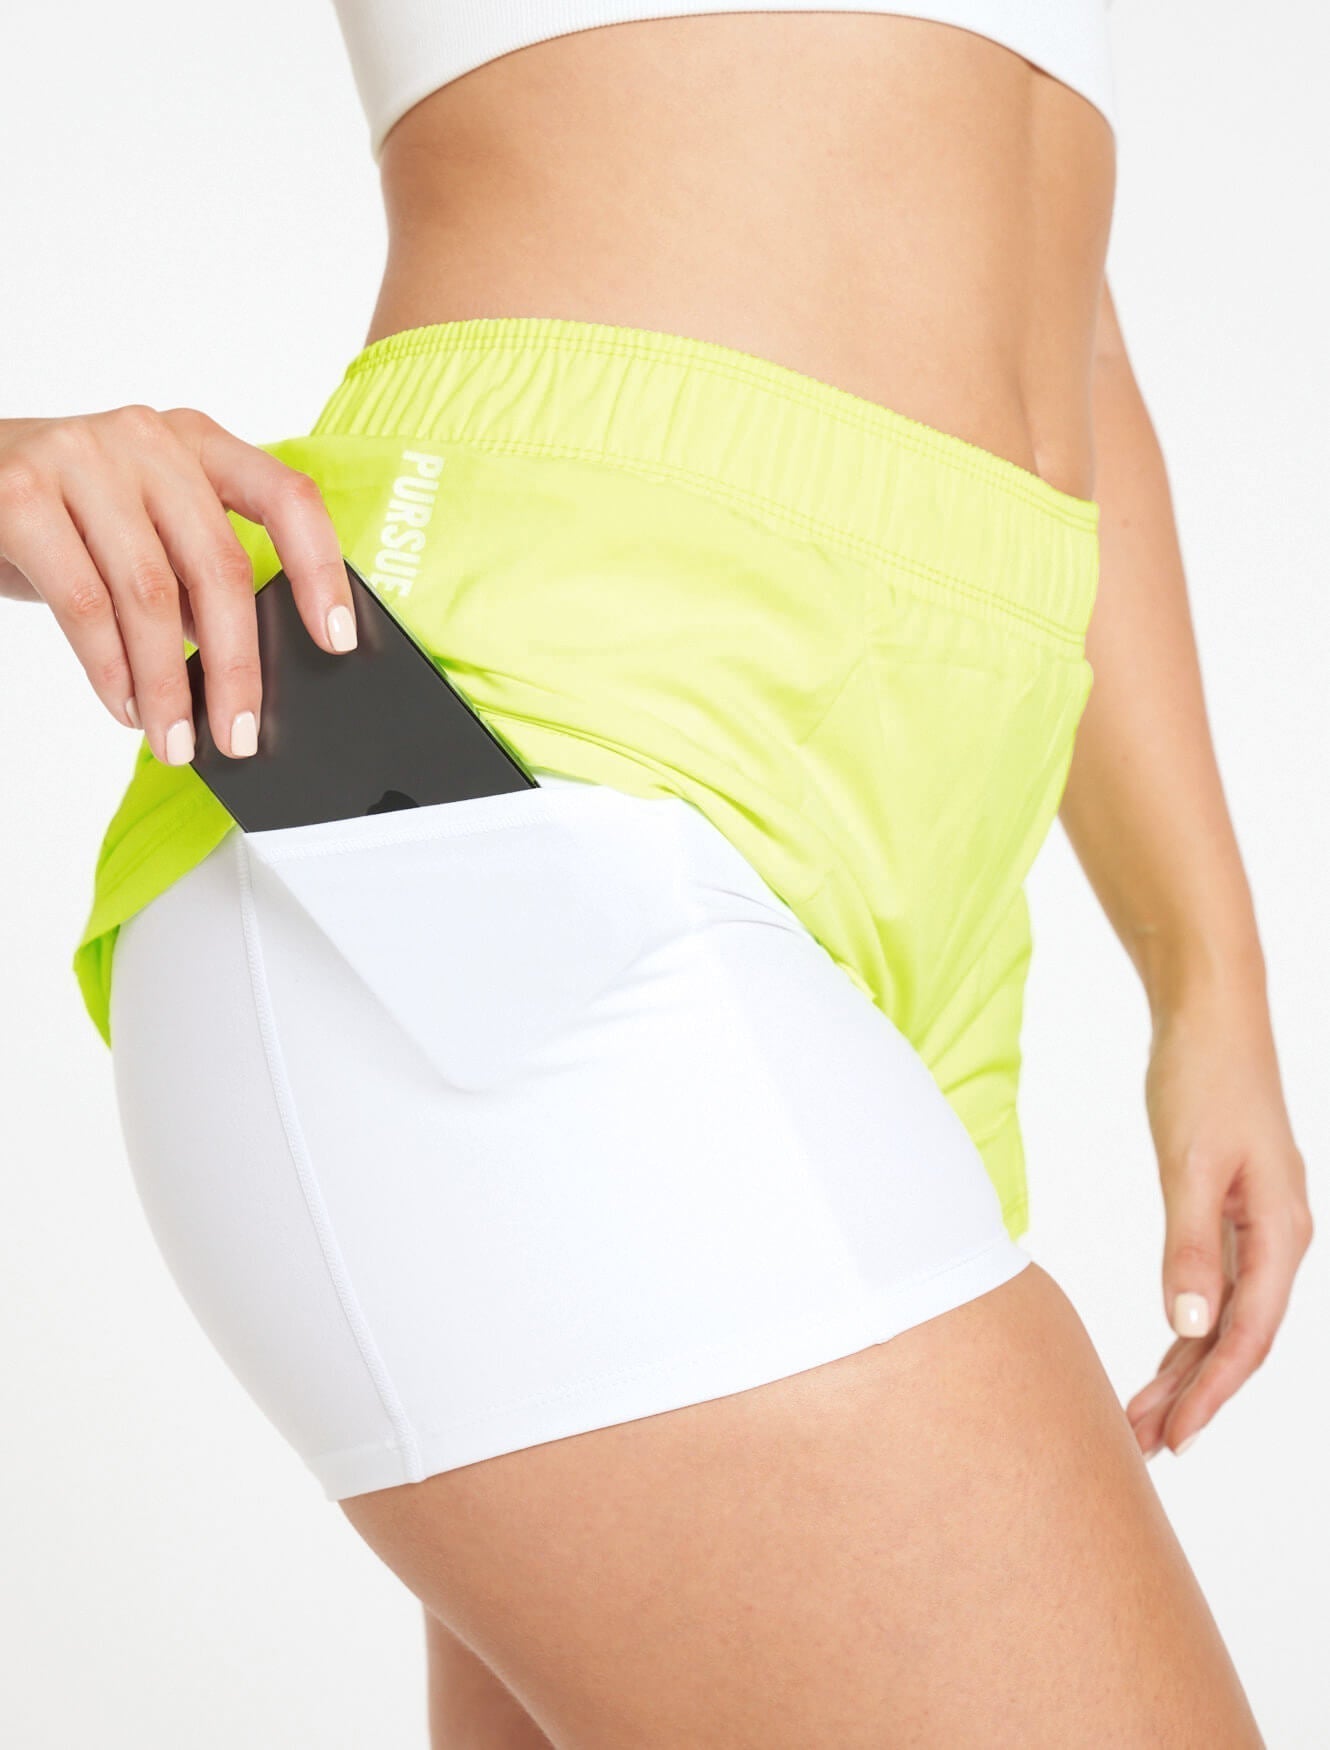 Pace Running Shorts / Volt Yellow Pursue Fitness 2